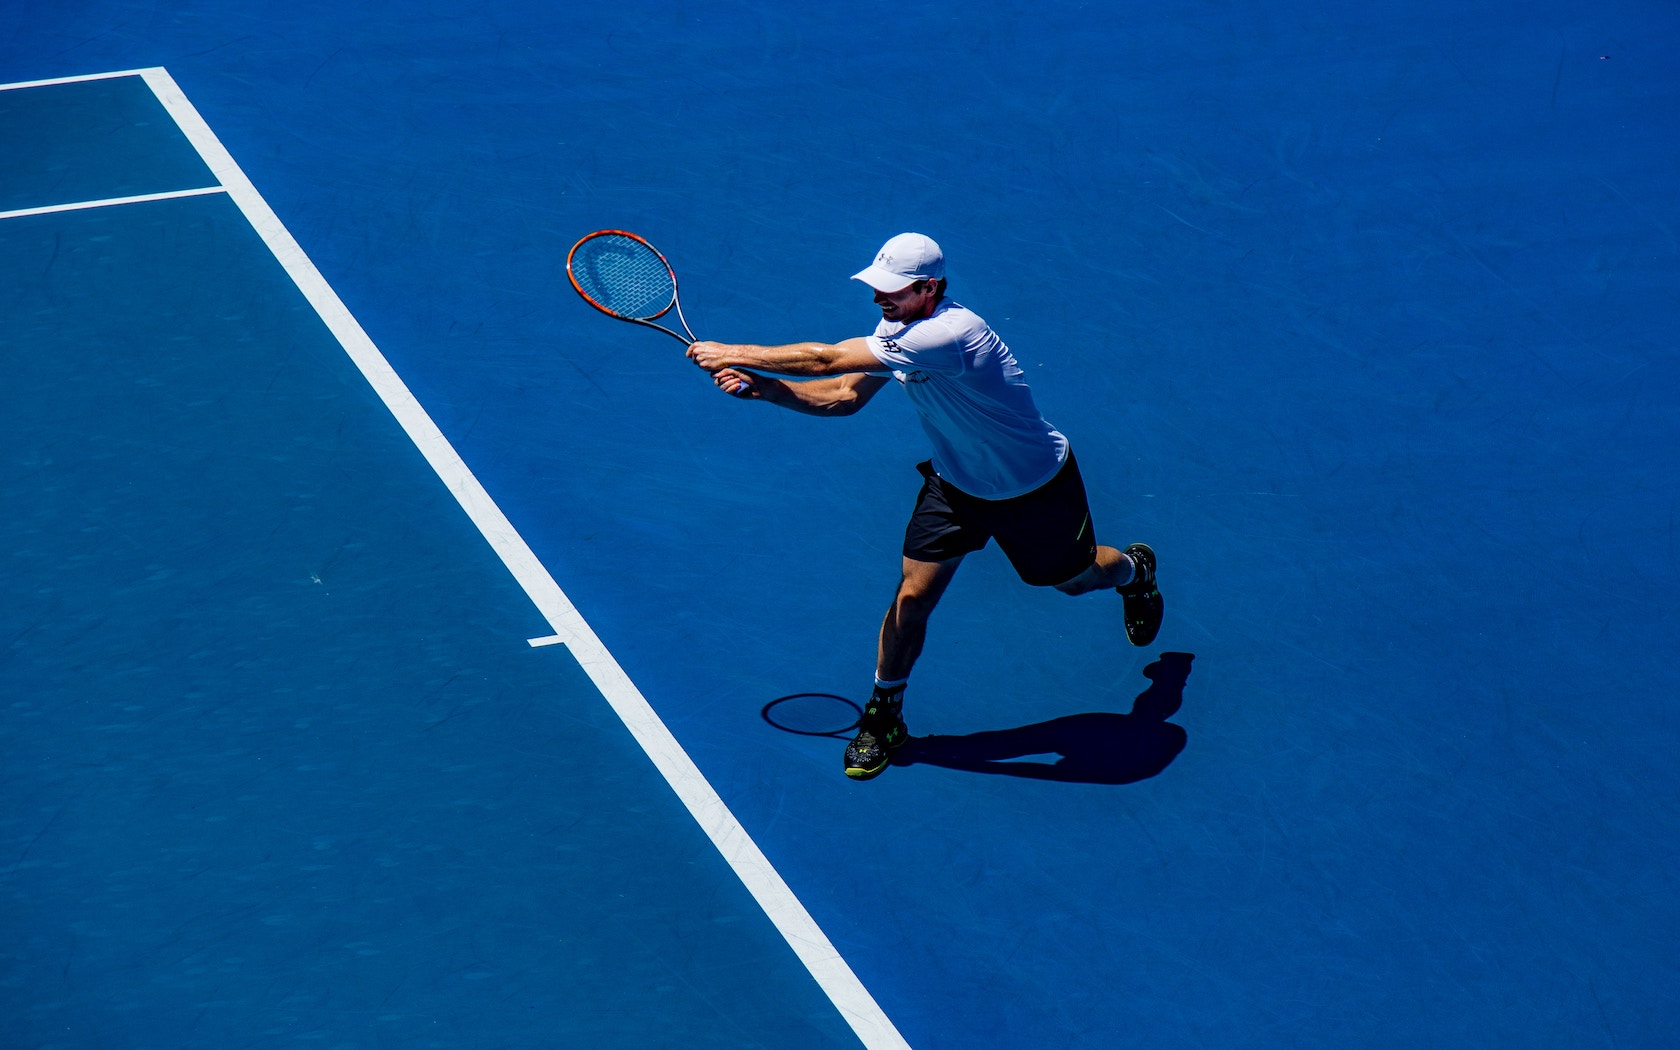 Where To Watch The Australian Open For Free In Melbourne